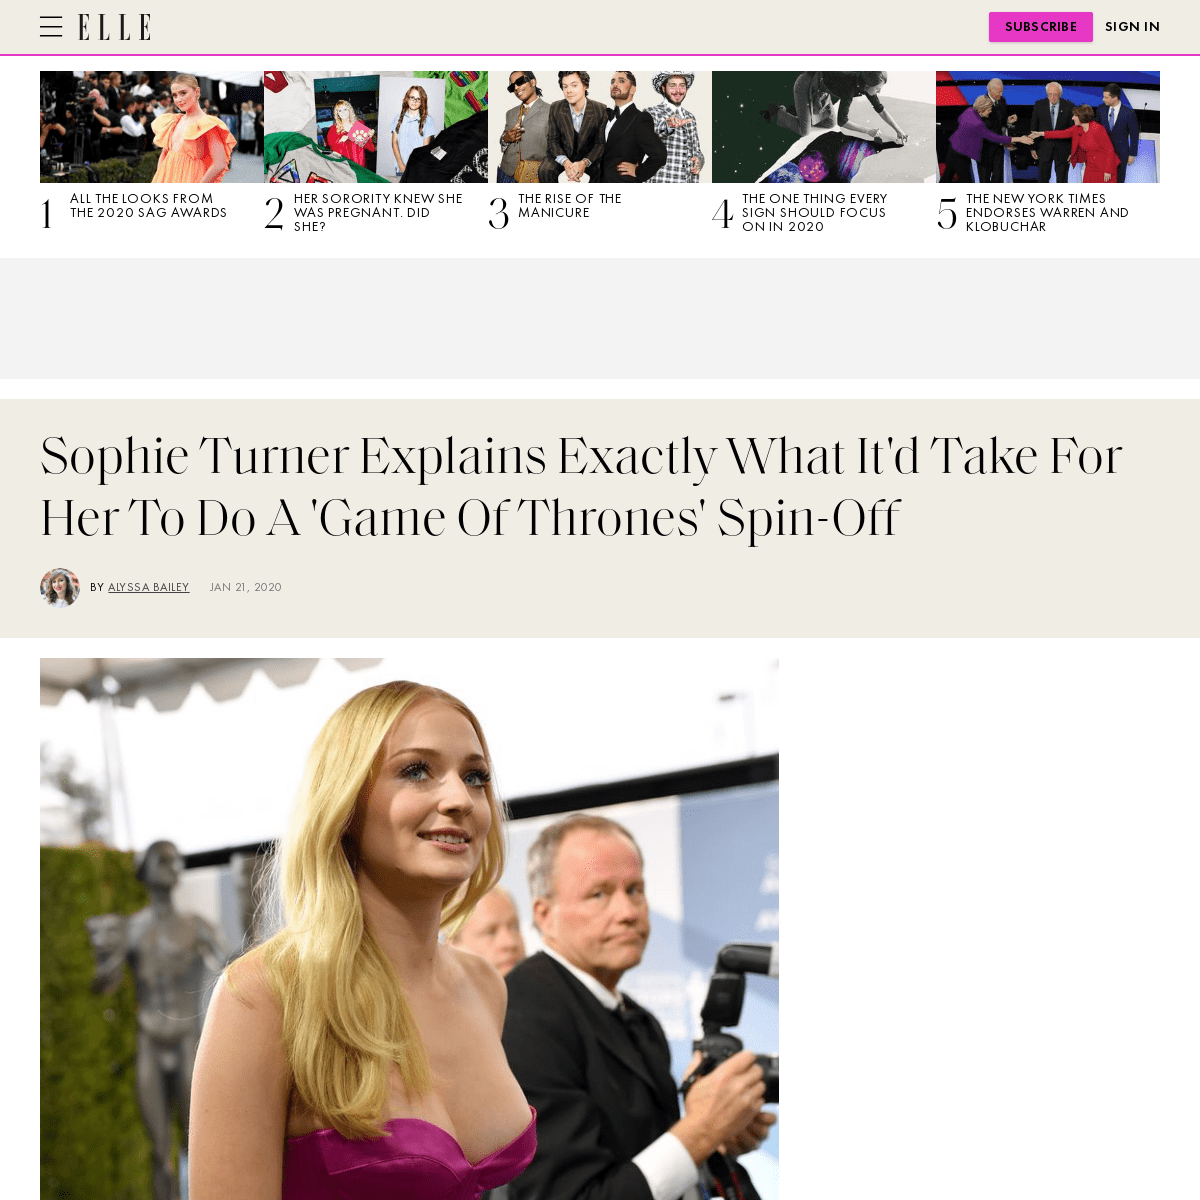 A complete backup of www.elle.com/culture/celebrities/a30607625/sophie-turner-game-of-thrones-spin-off-interview/